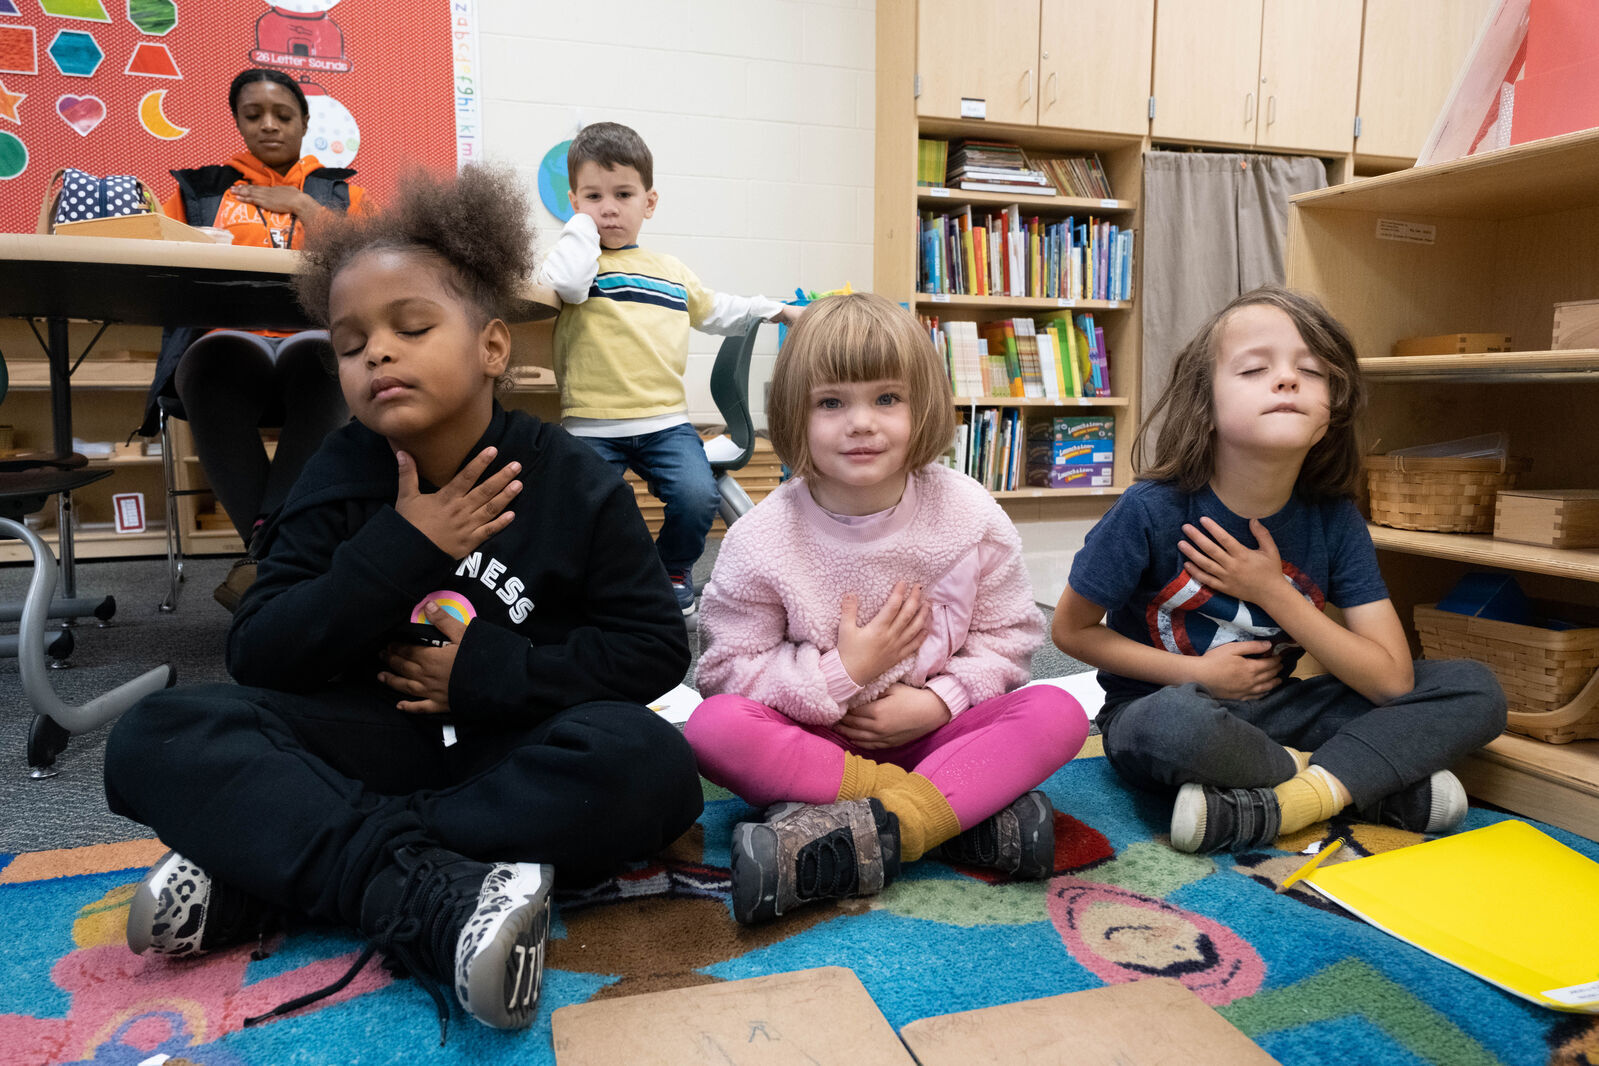 Students at Parker Woods Montessori listening to Mindful Music. Photo by Kyle Wolff